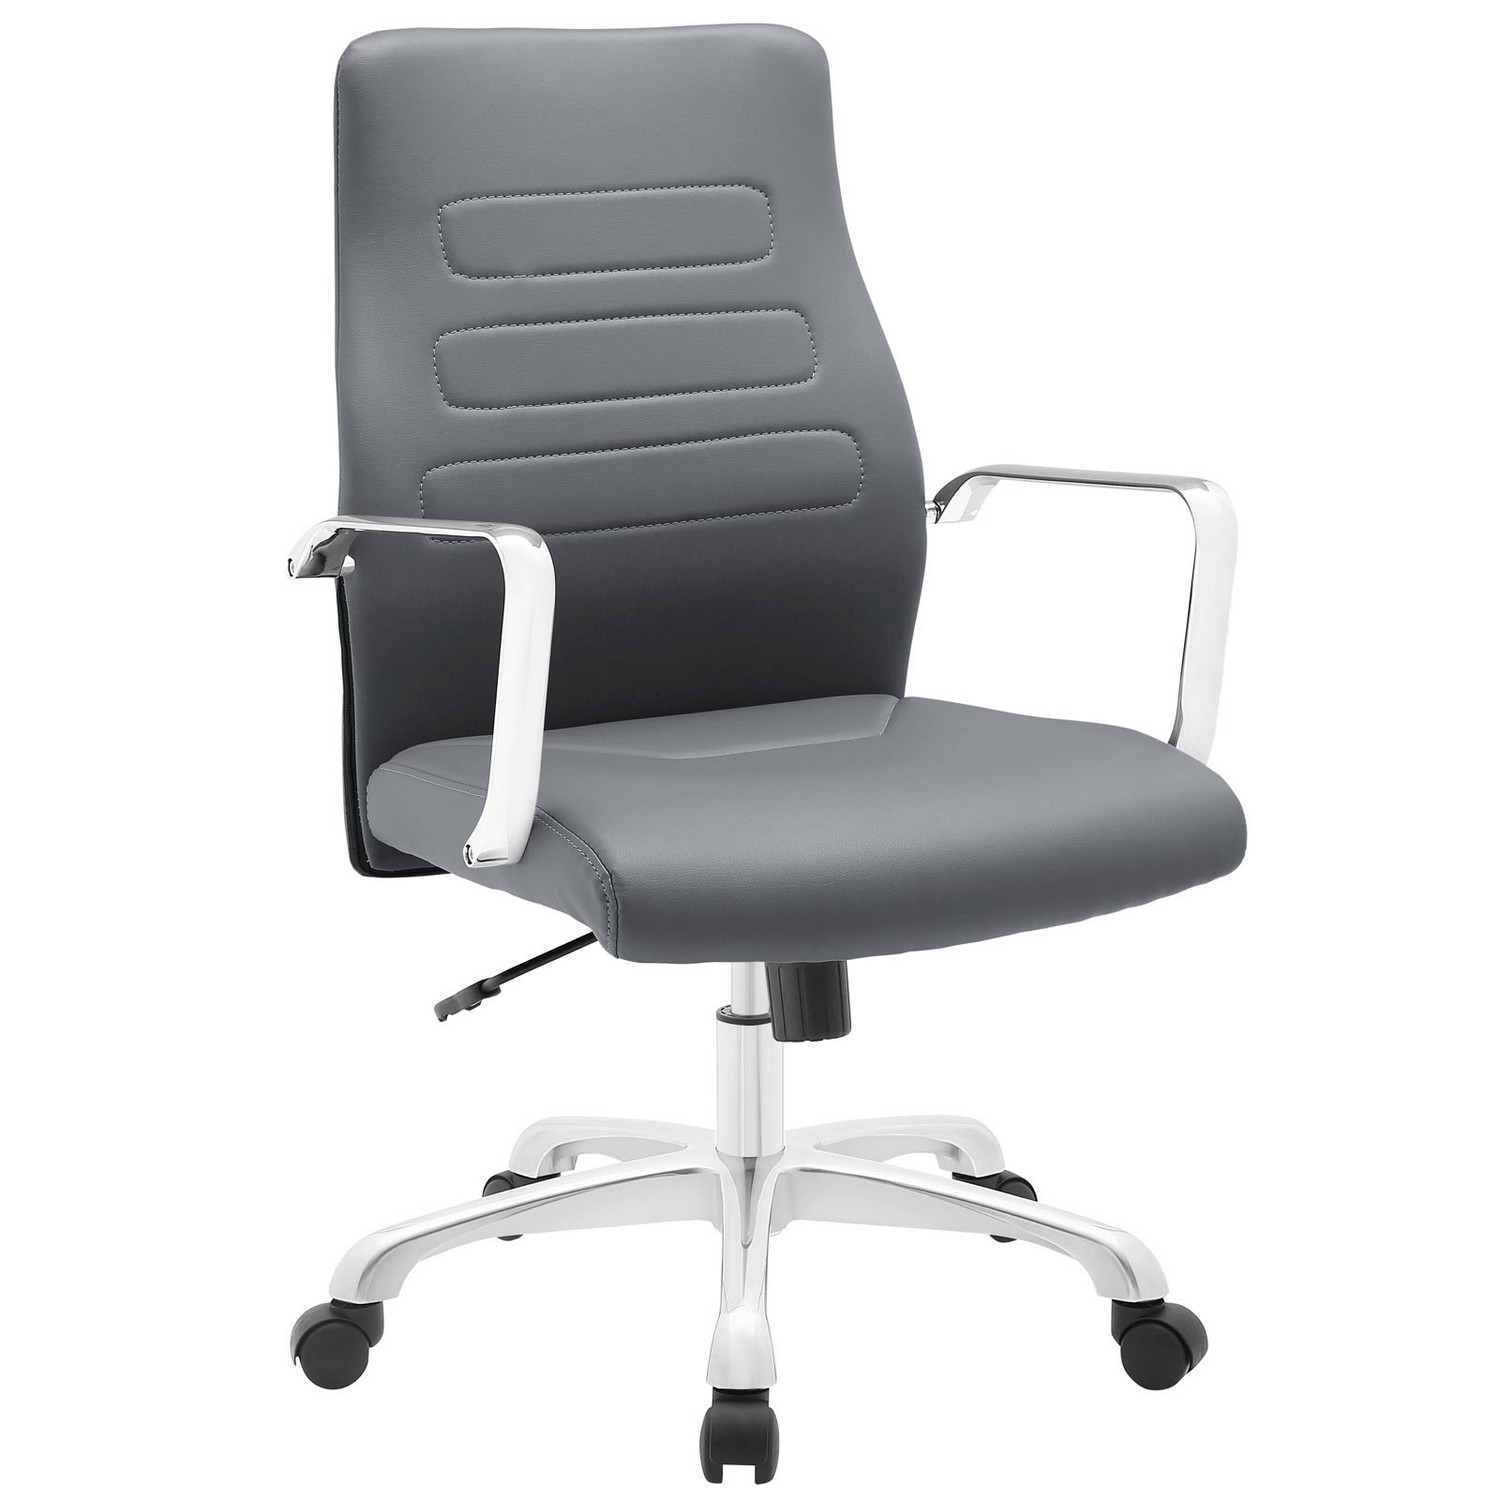 Modway Depict Mid Back Aluminum Office Chair - Gray